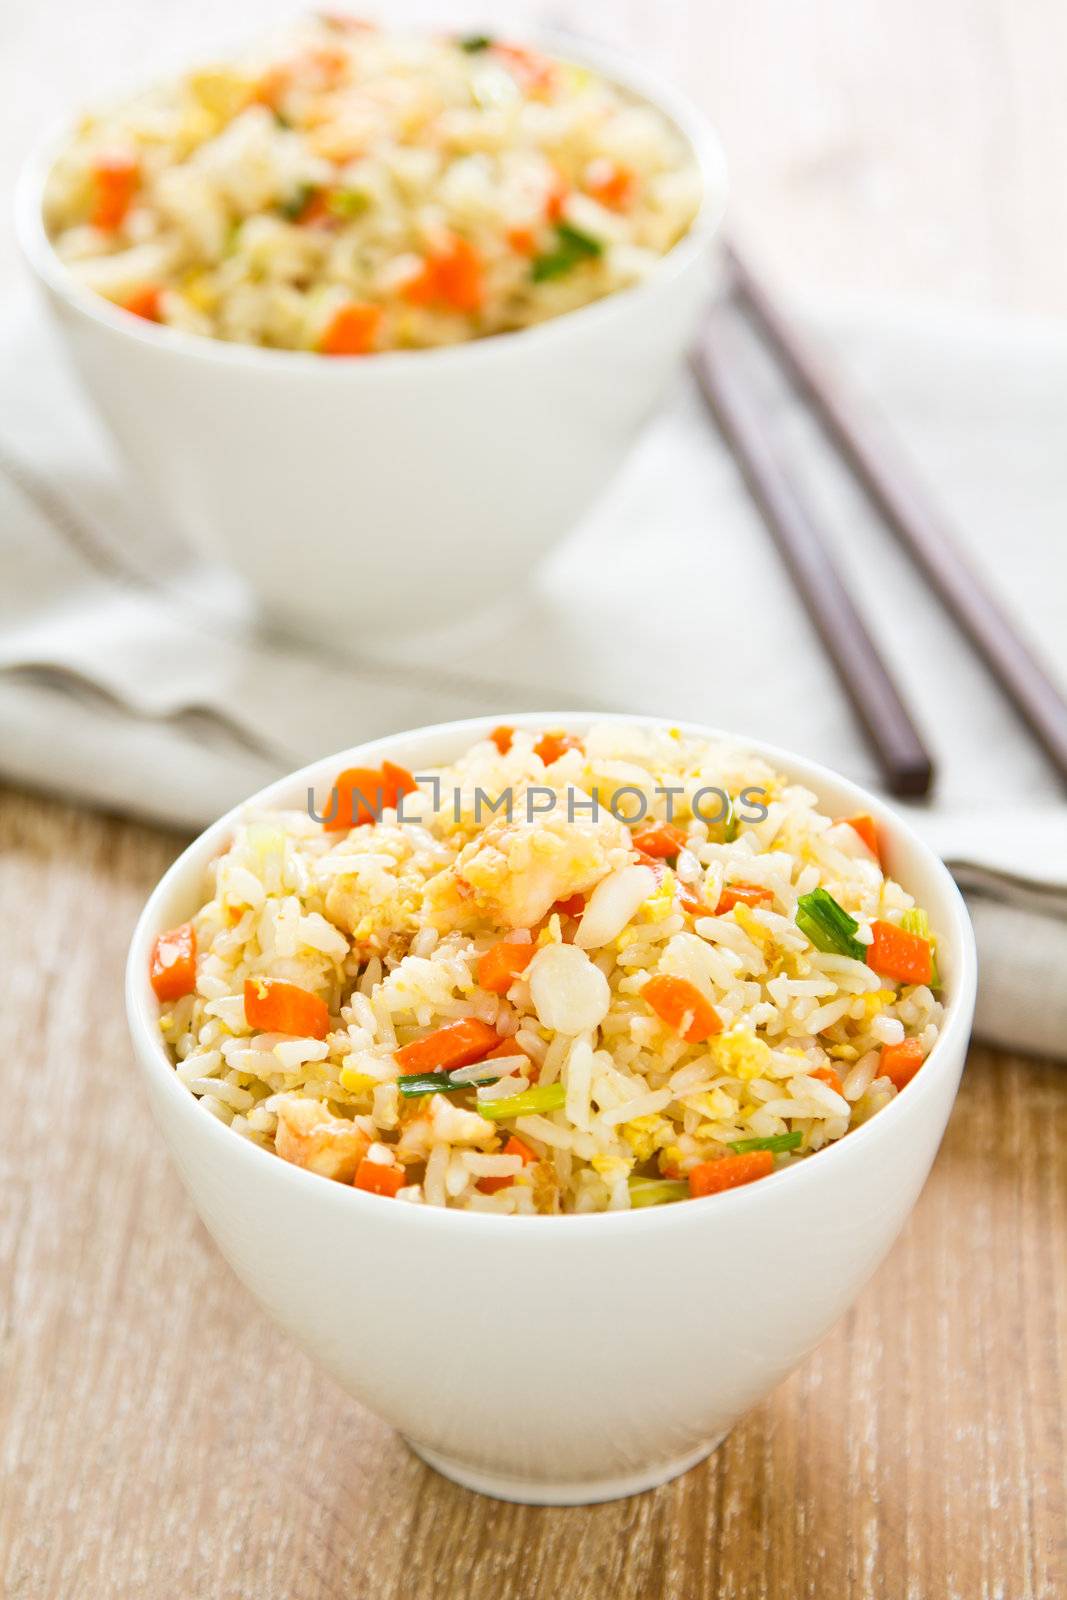 Fried rice with crab and vegetables by vanillaechoes